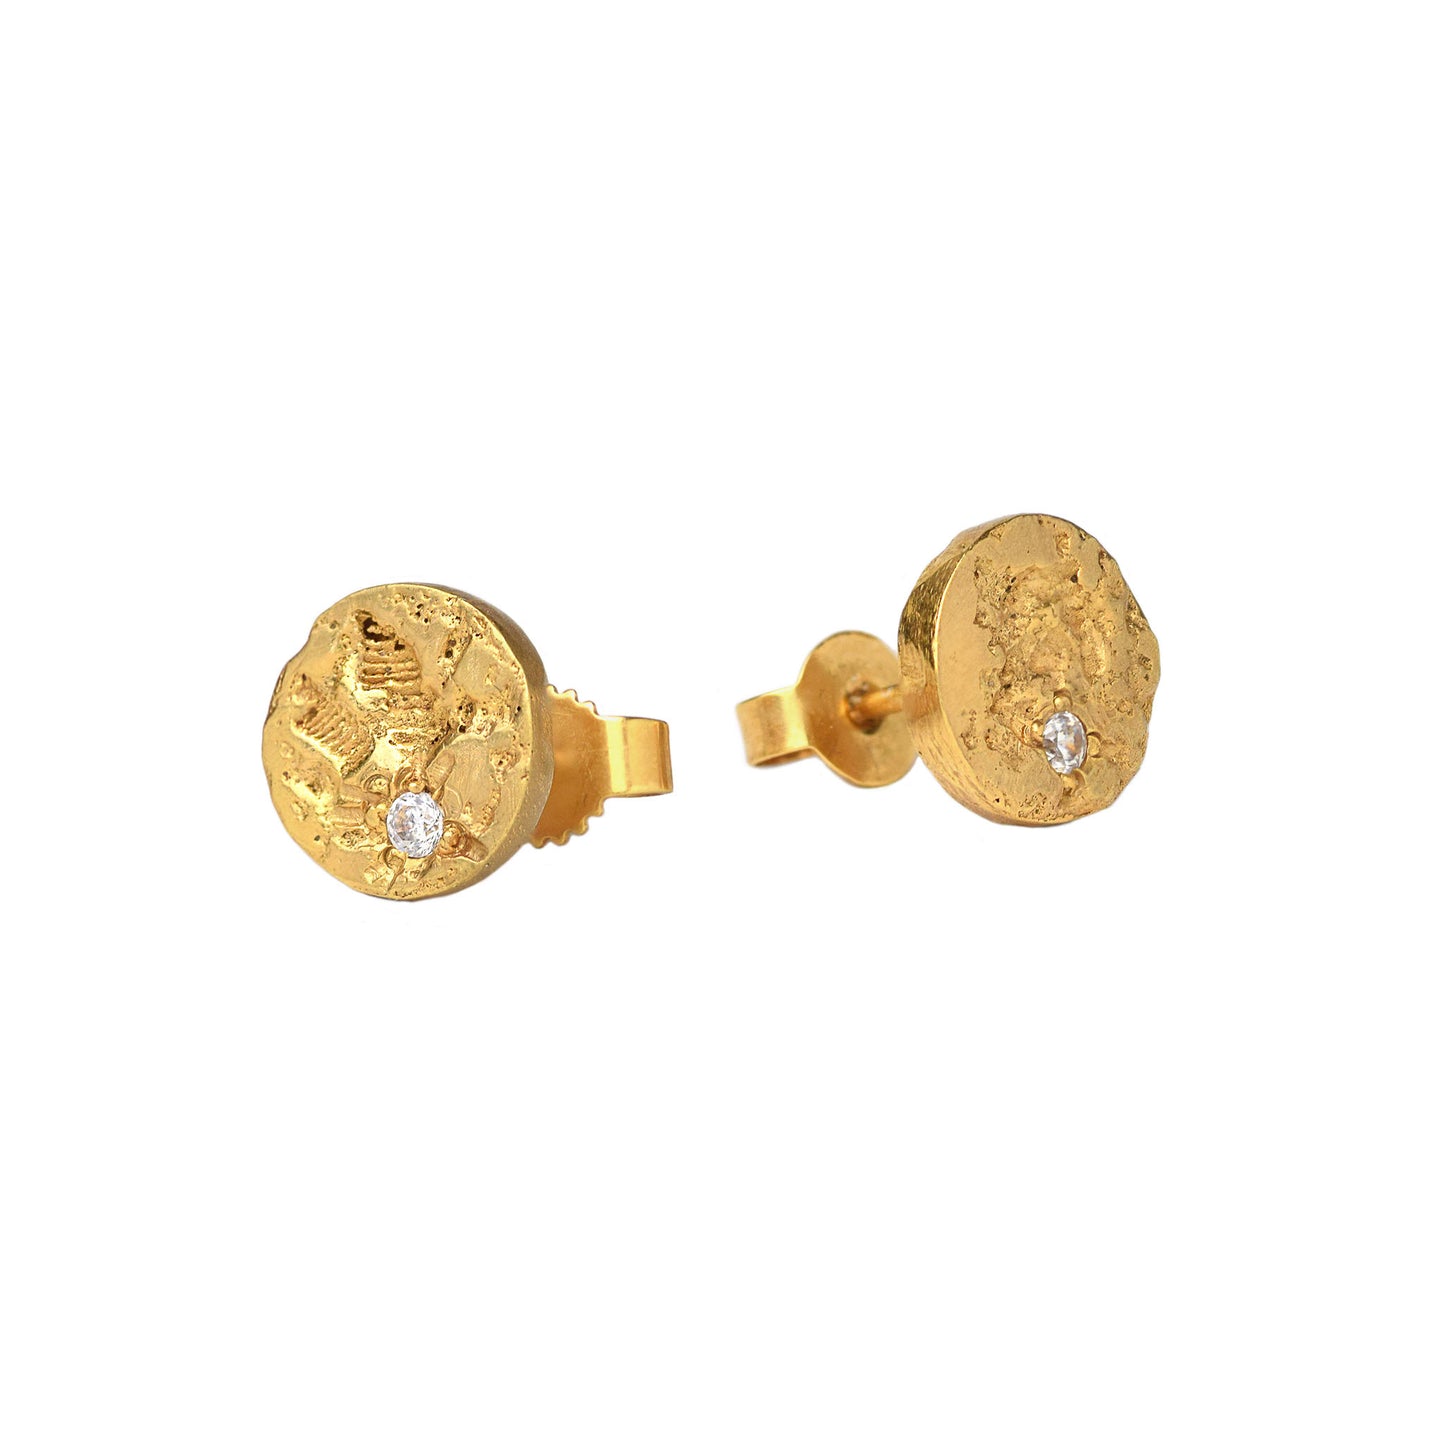 Gold circle stud earring with a white diamond